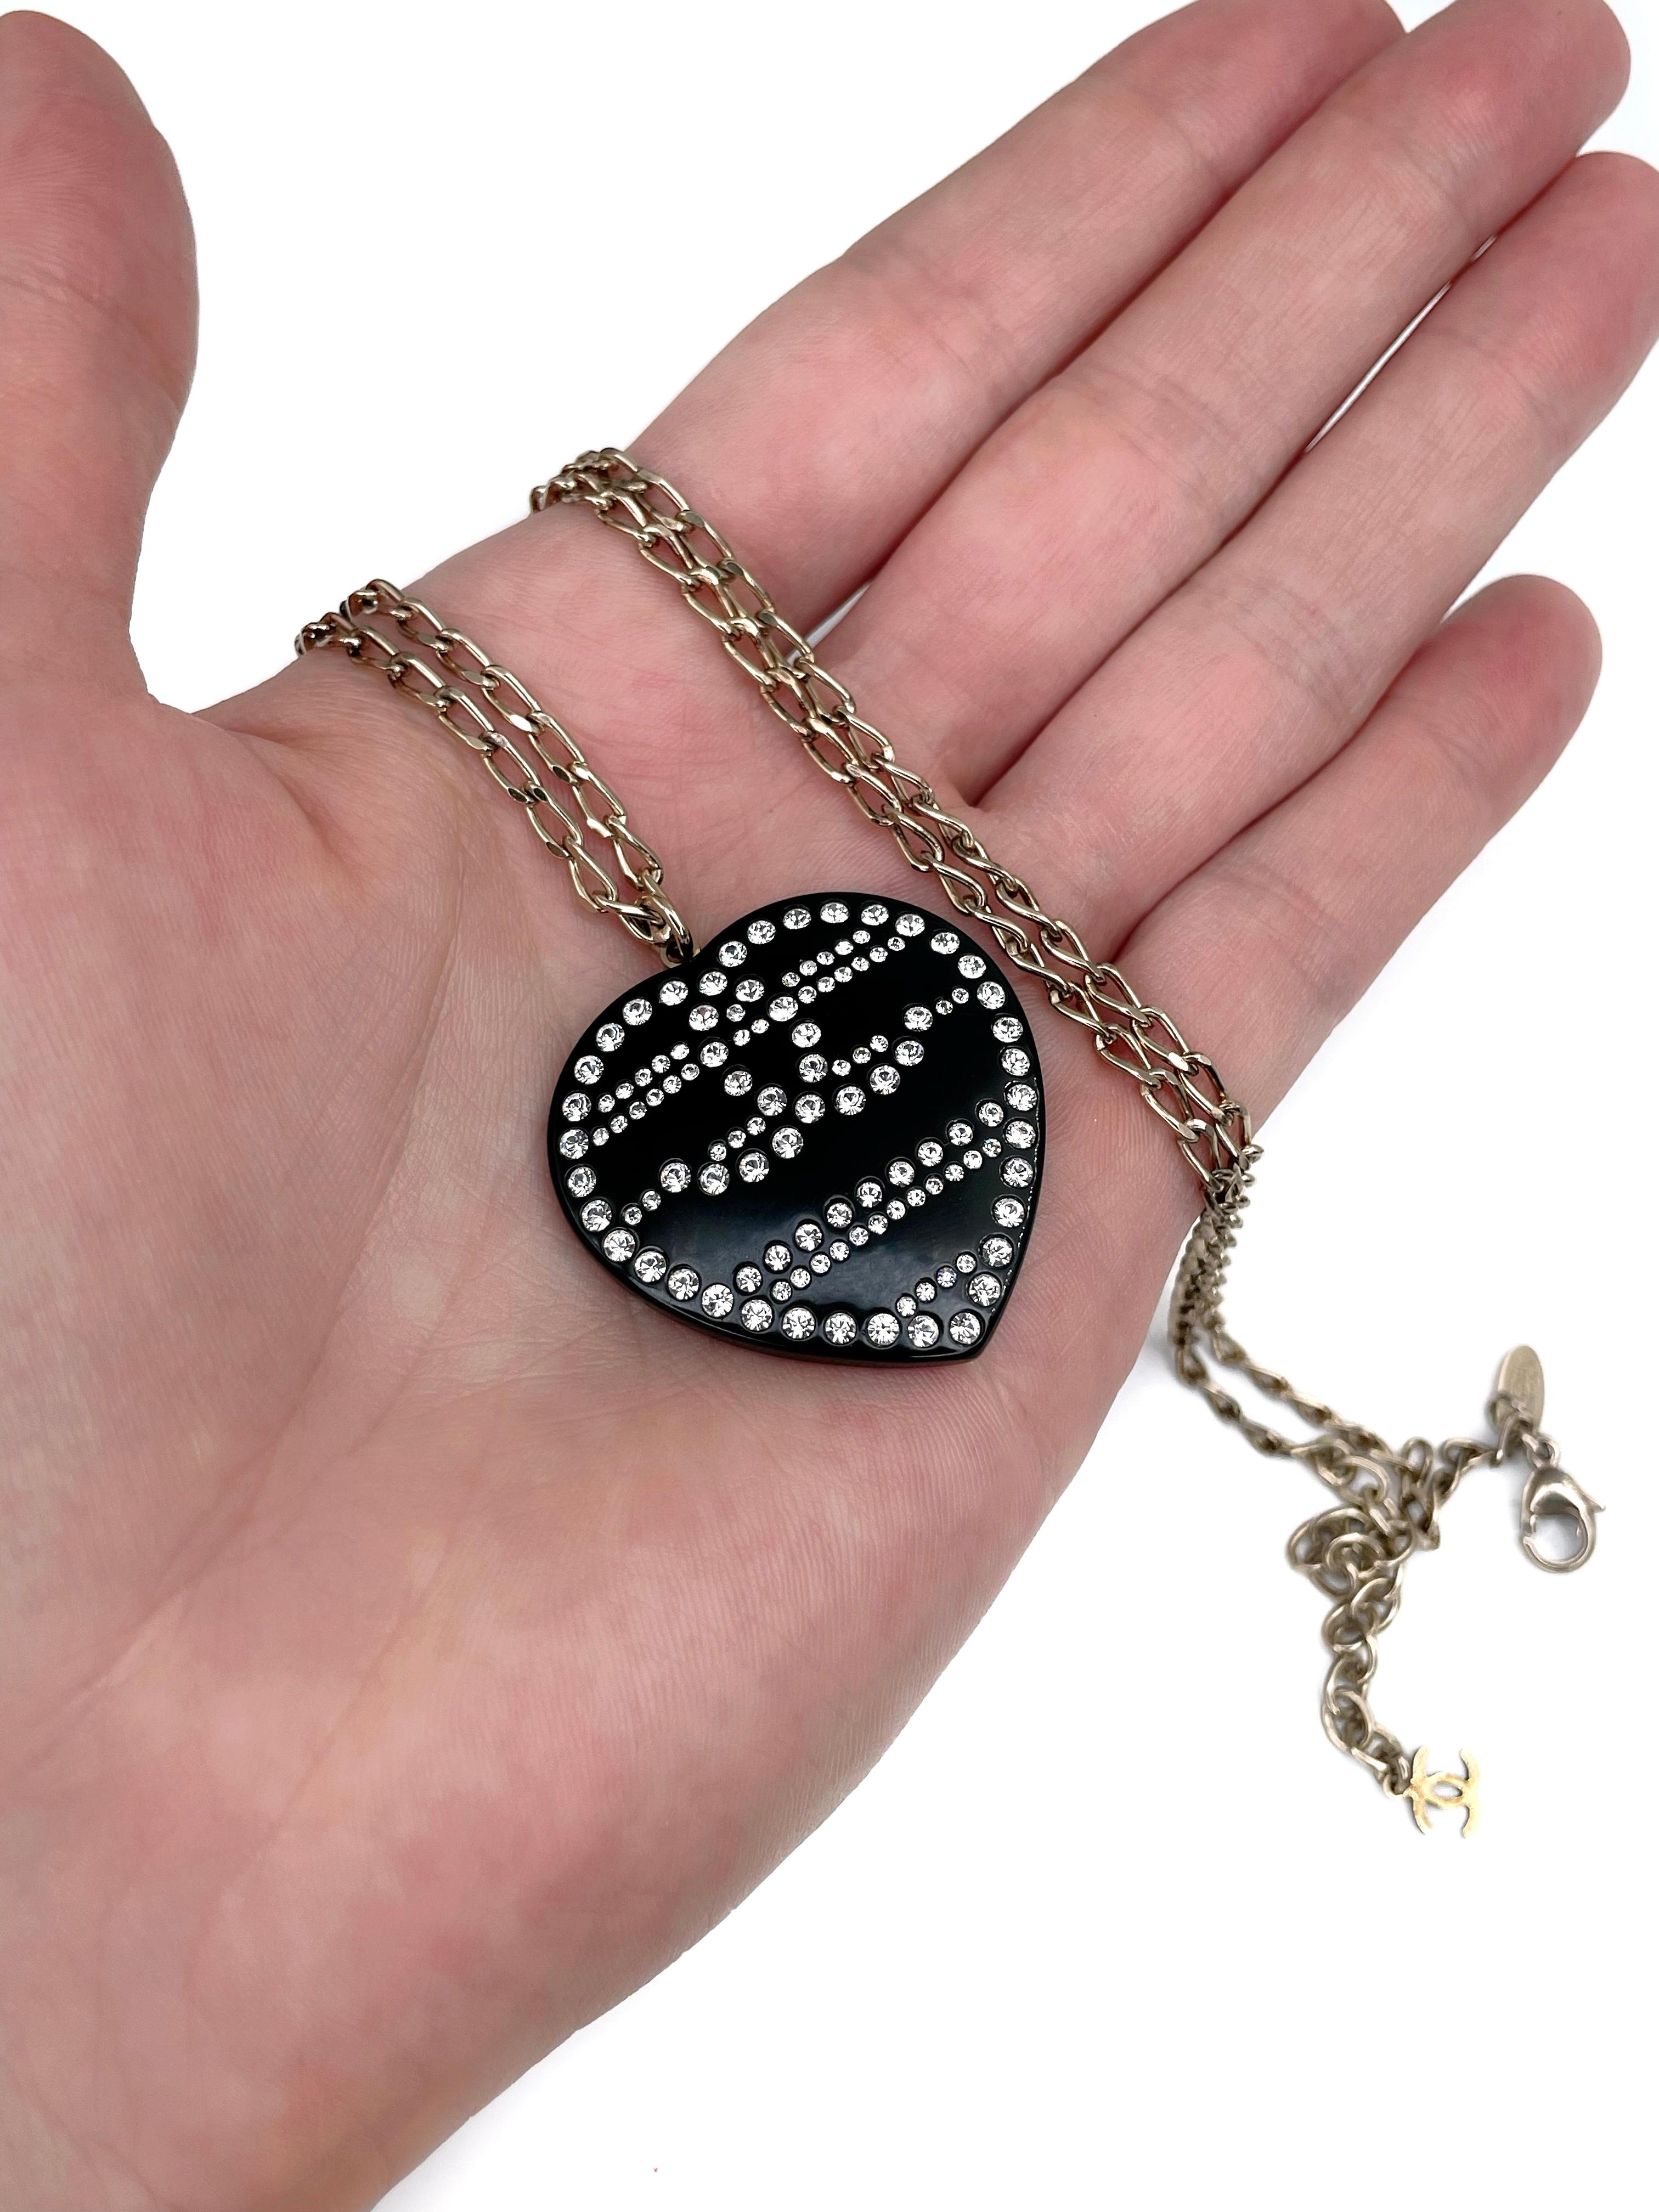 This is a heart pendant with a chain designed by Chanel in 2009. The piece is gold plated. It is crafted in black resin and is adorned with clear shiny crystals. 

Chain can be worn in different lengths - from 65cm (at max) to 60cm (at min).